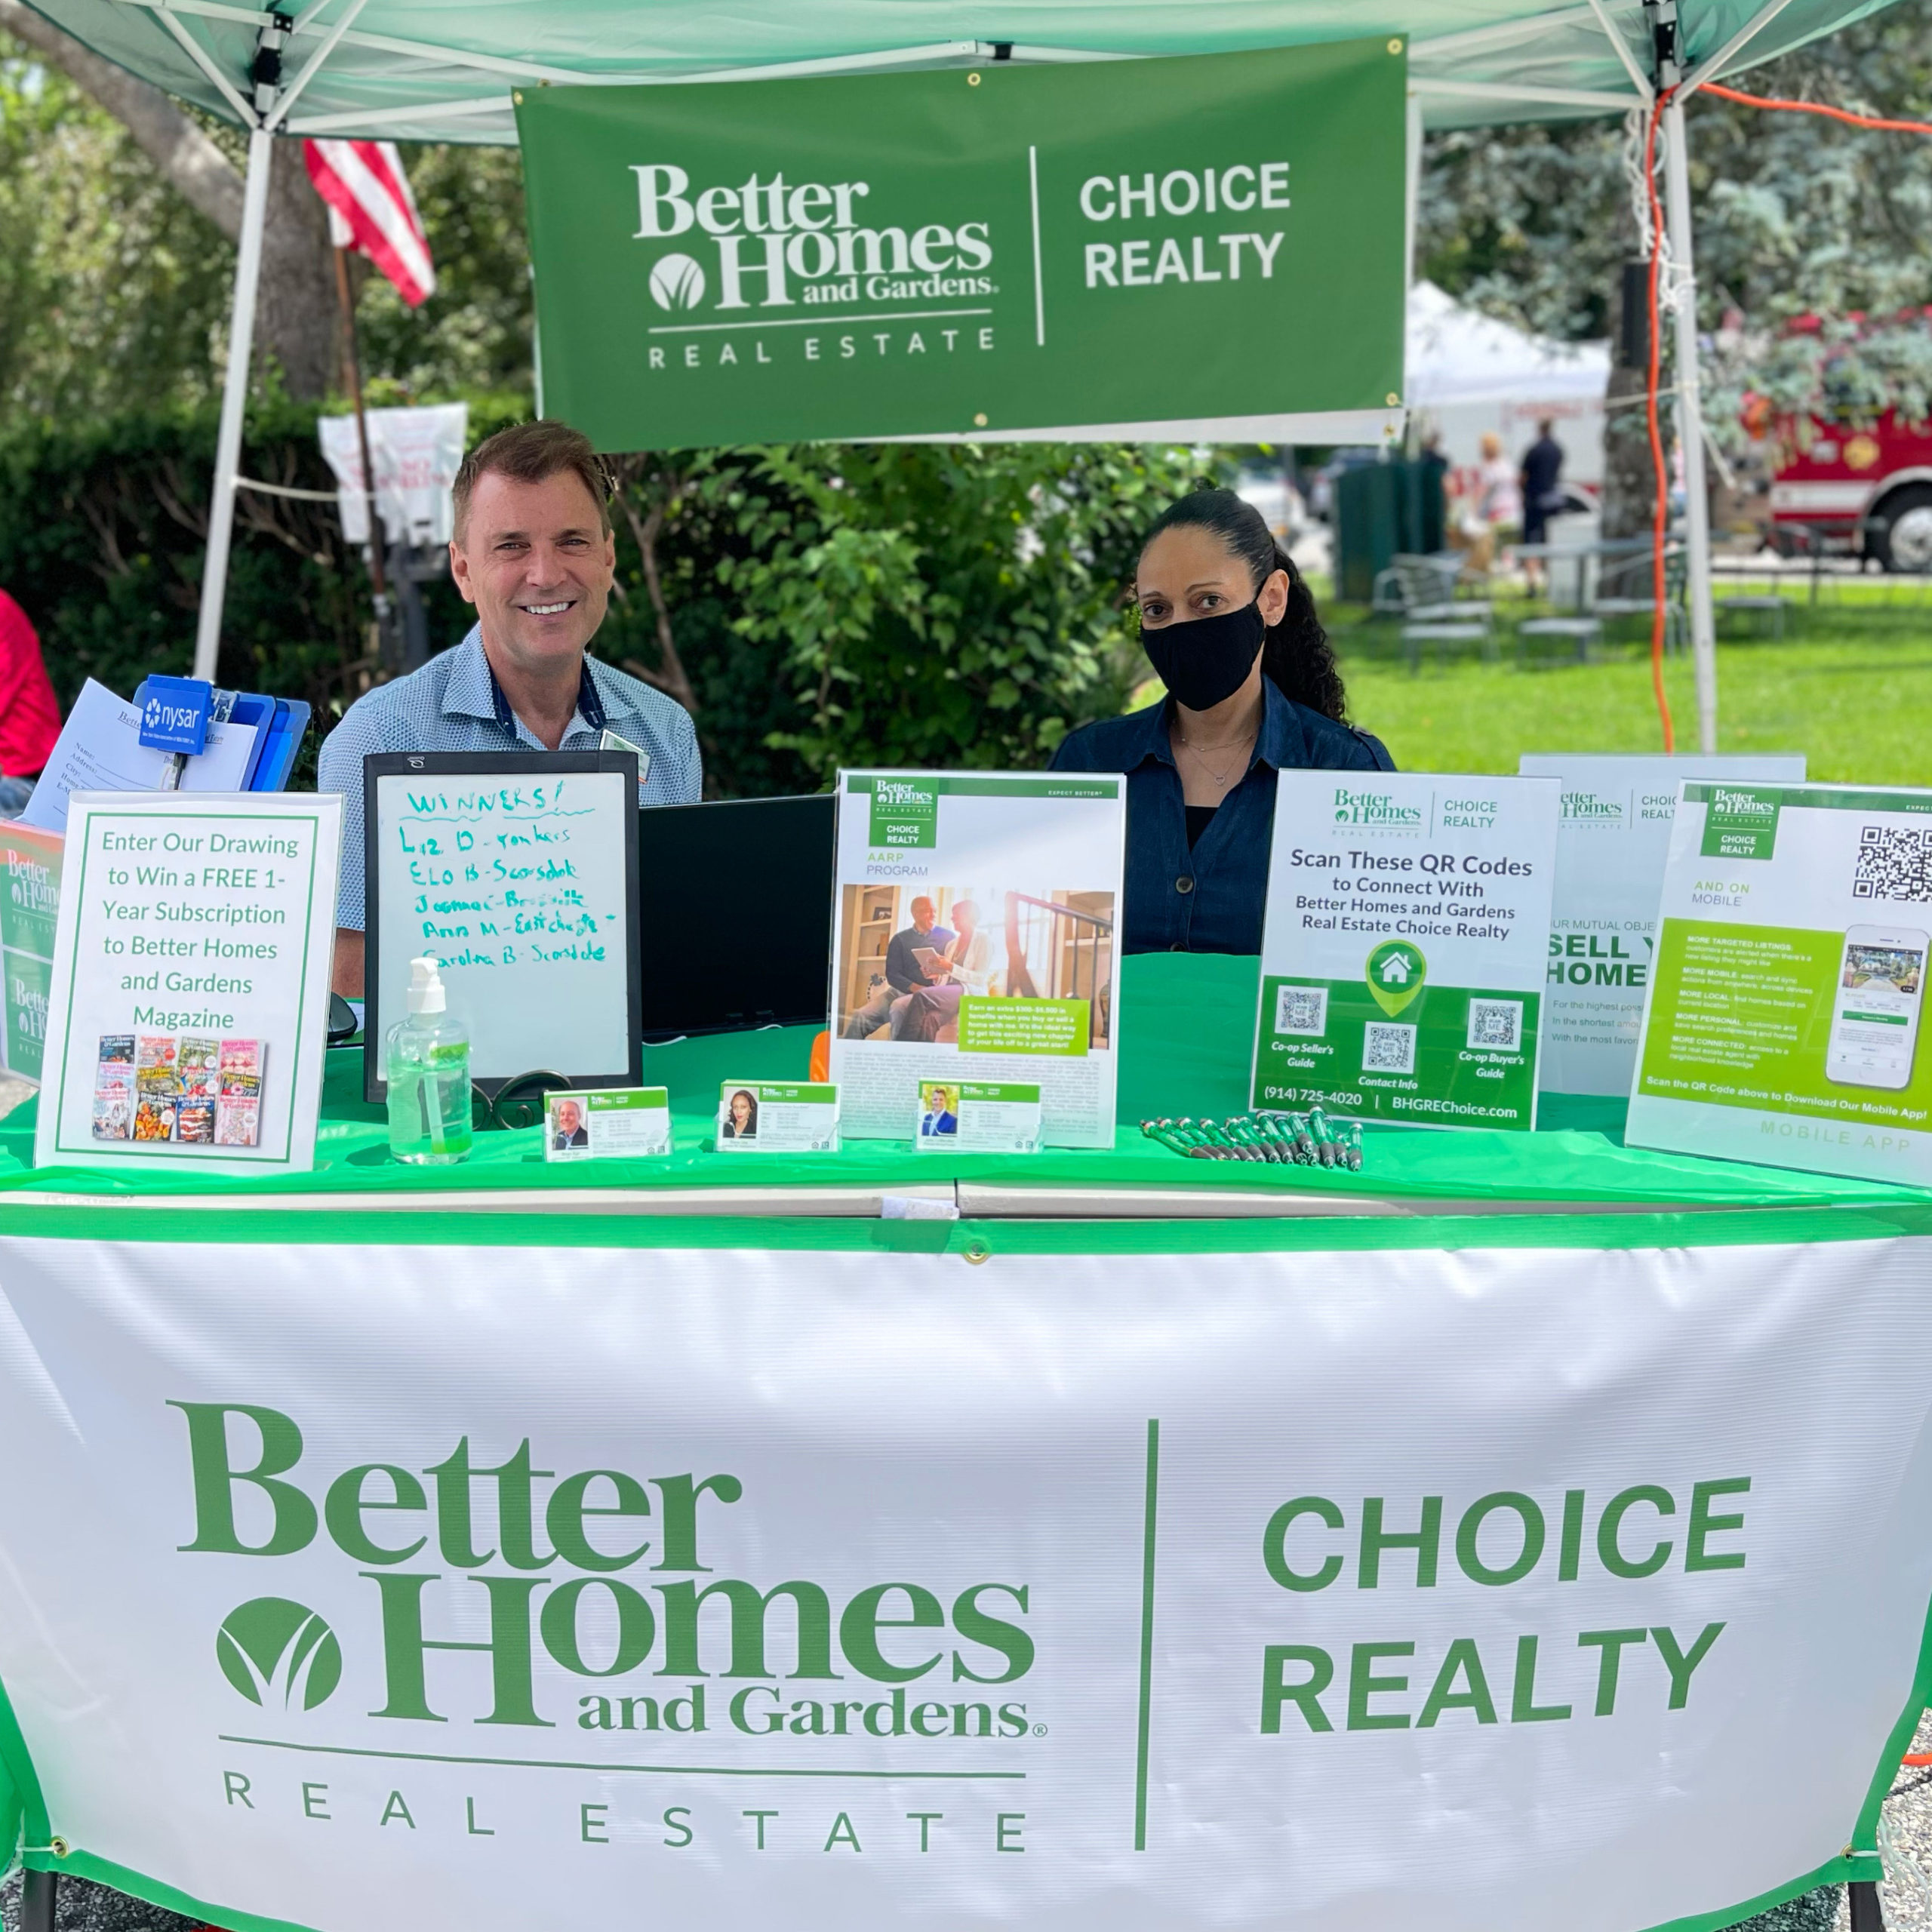 Better Homes and Gardens Real Estate Choice Realty at the 2021 Scarsdale Sidewalk Sale Sponsored by Scarsdale Business Alliance